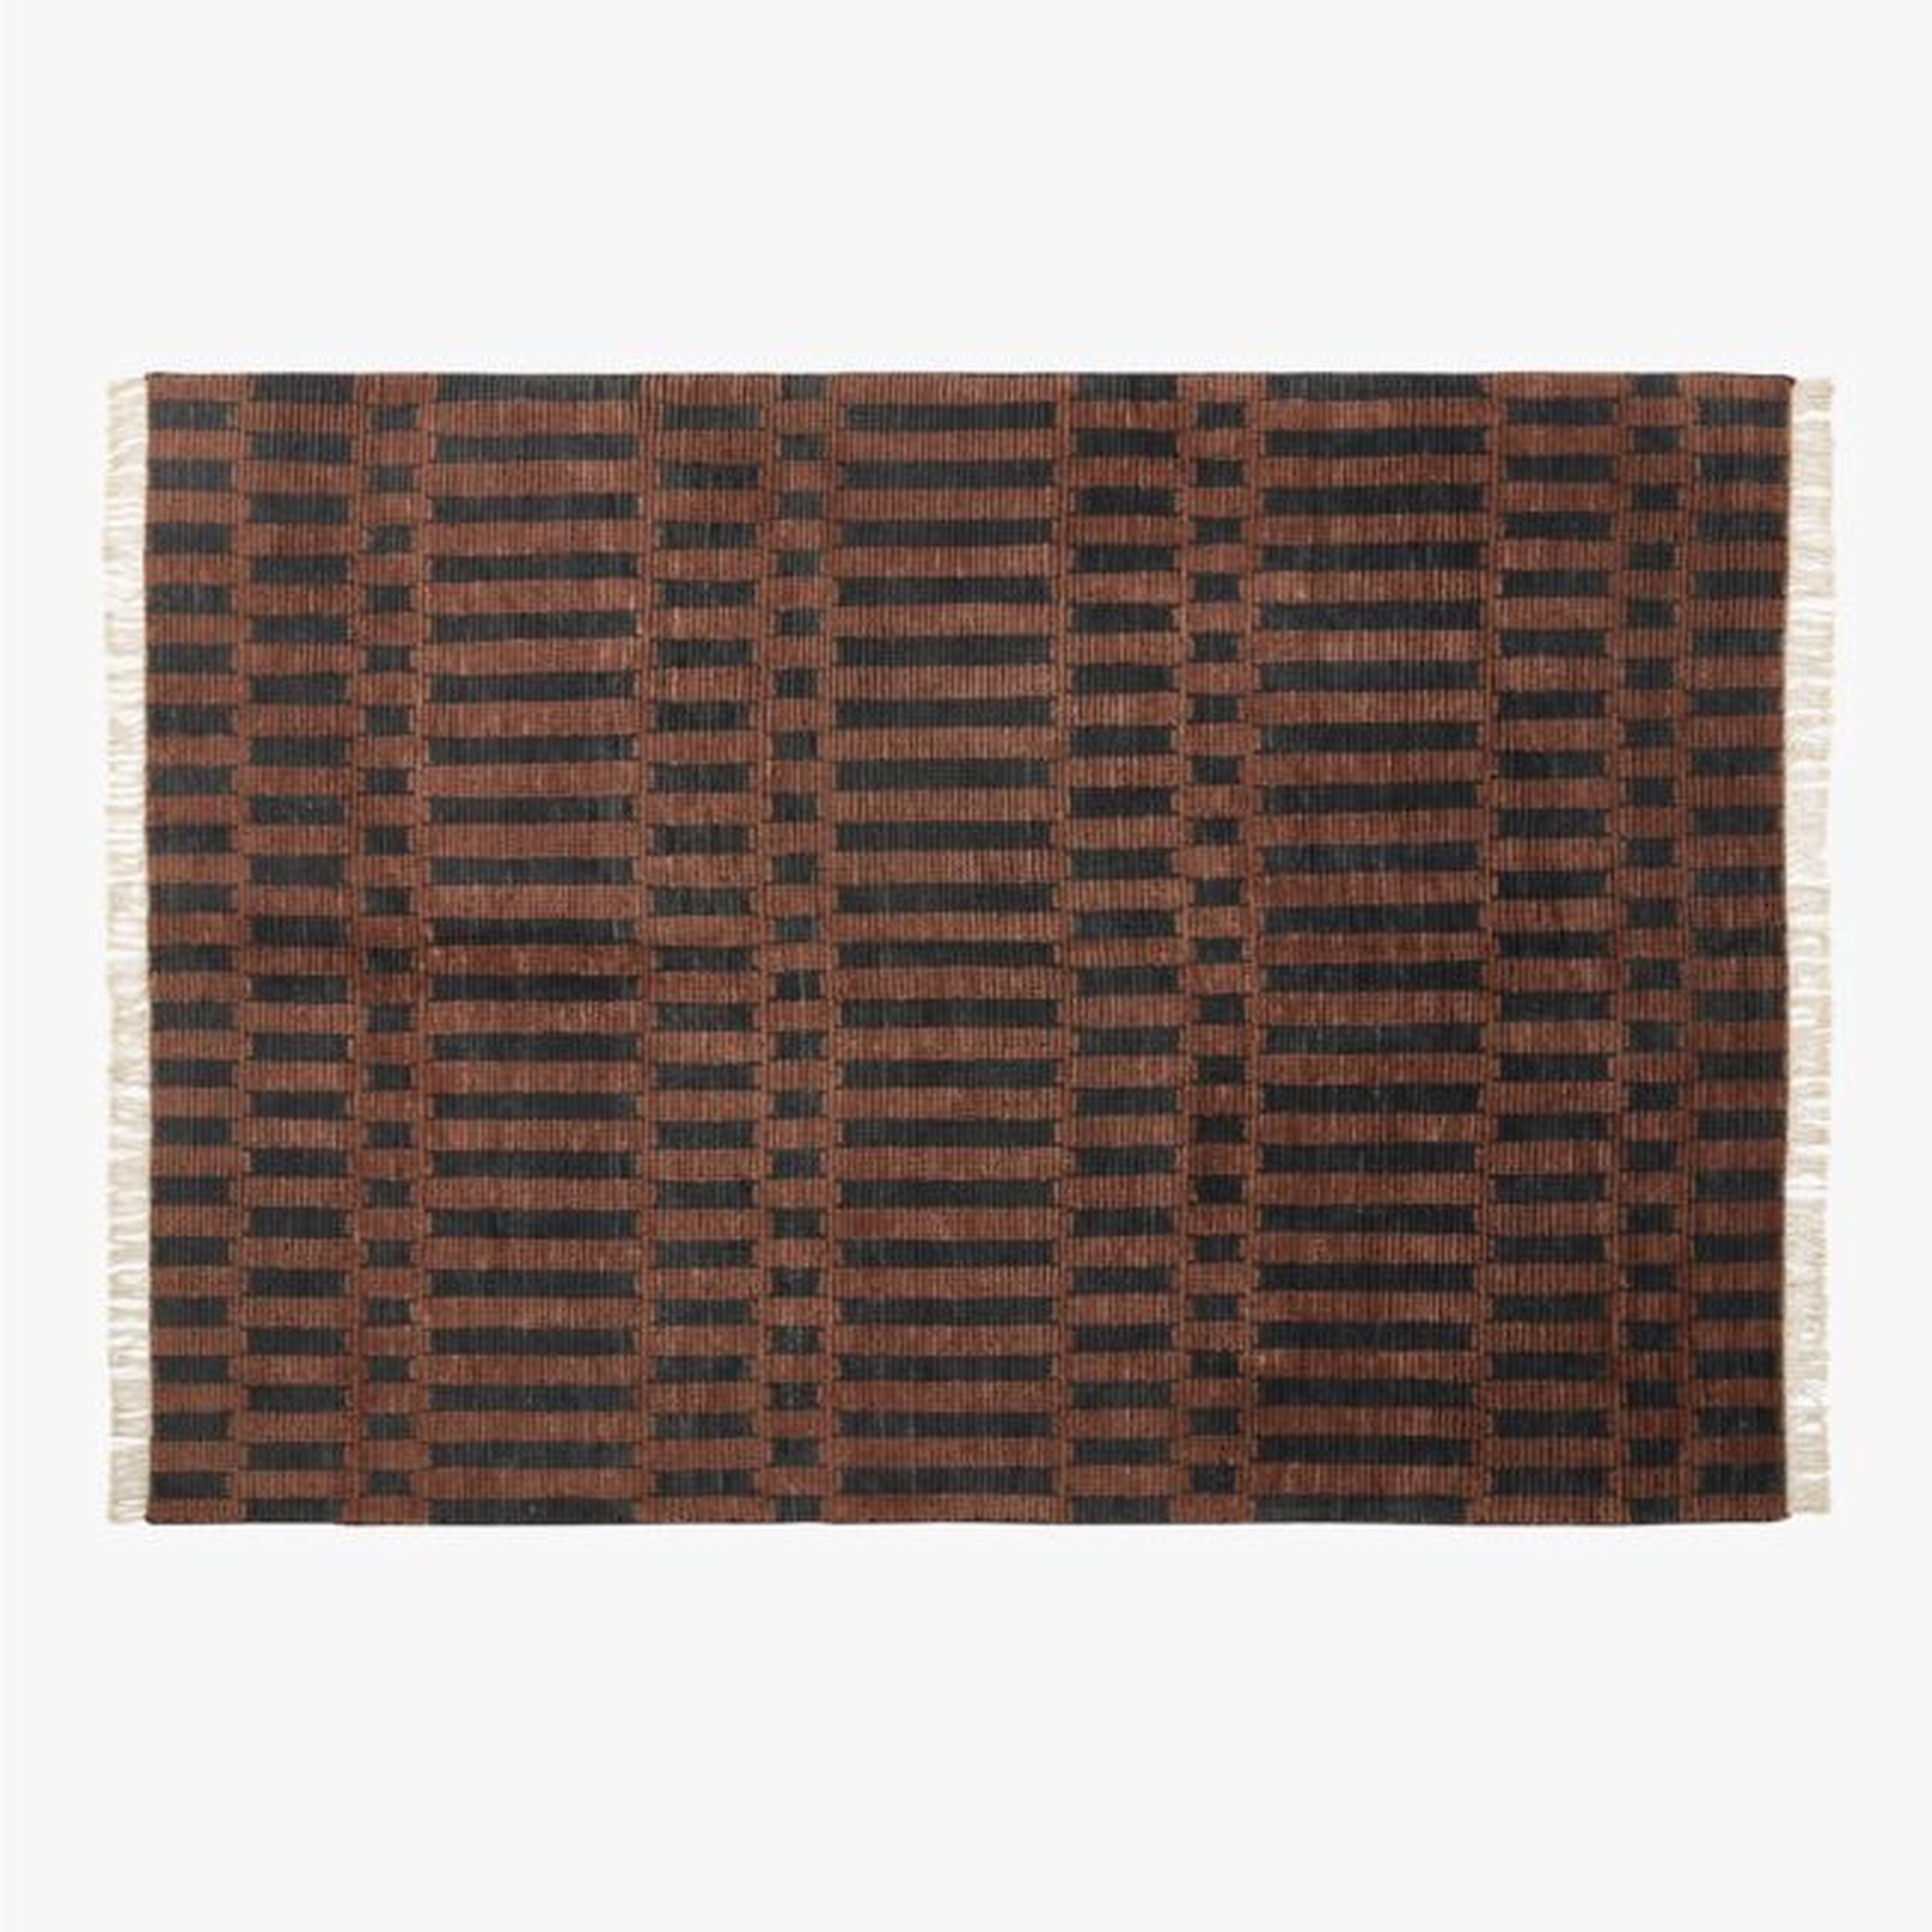 Esme Hand-Knotted Rug, Black & Brown, 6' x 9' - CB2